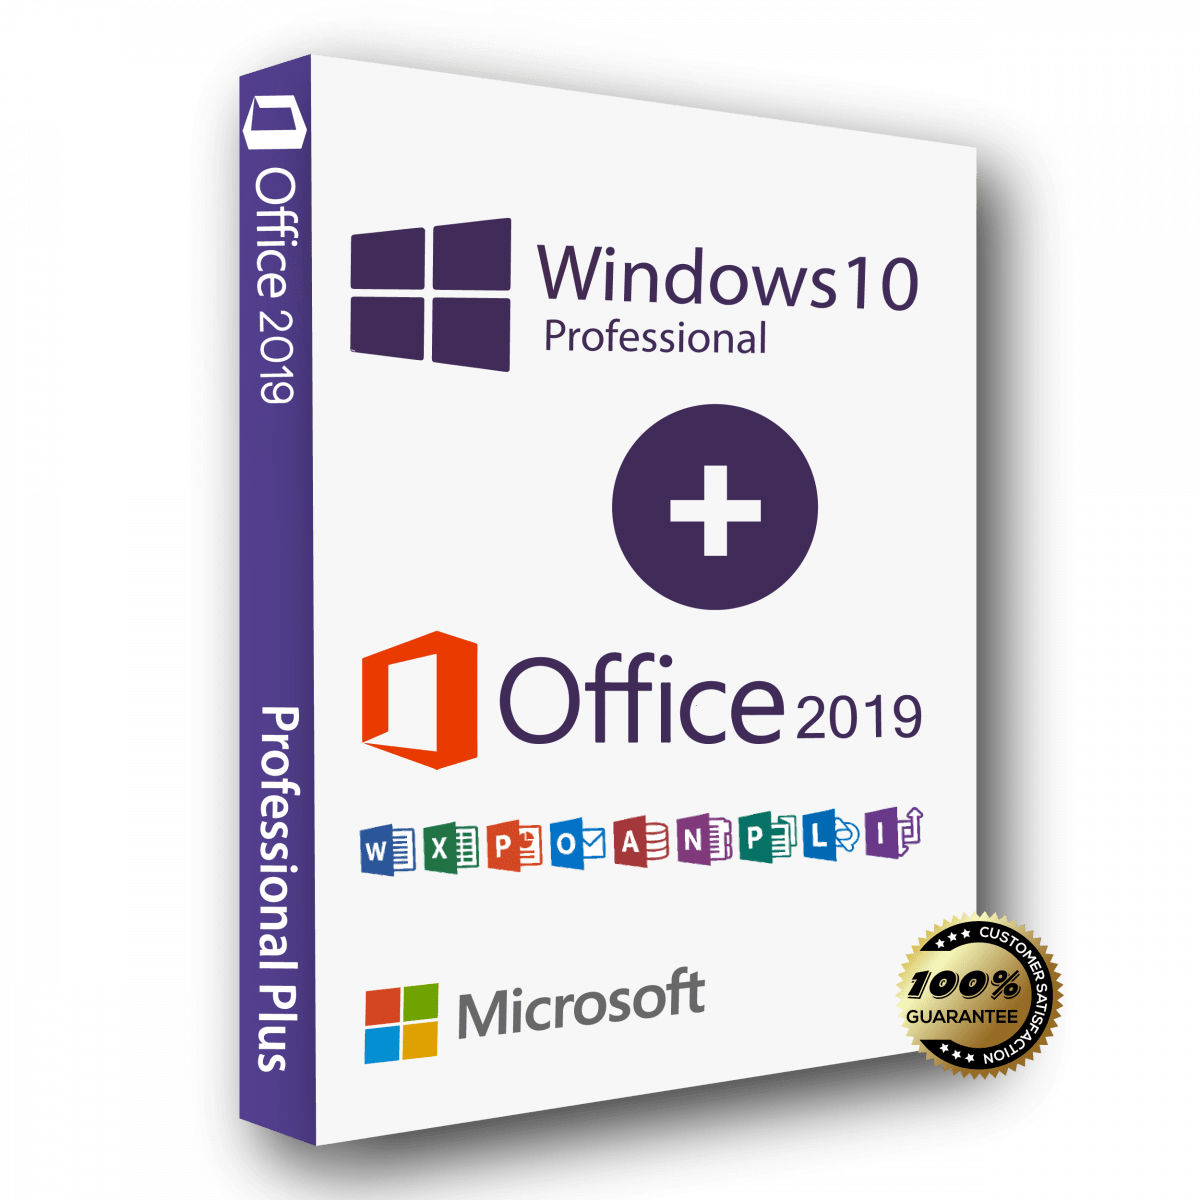 Windows 10 pro and Office 2019